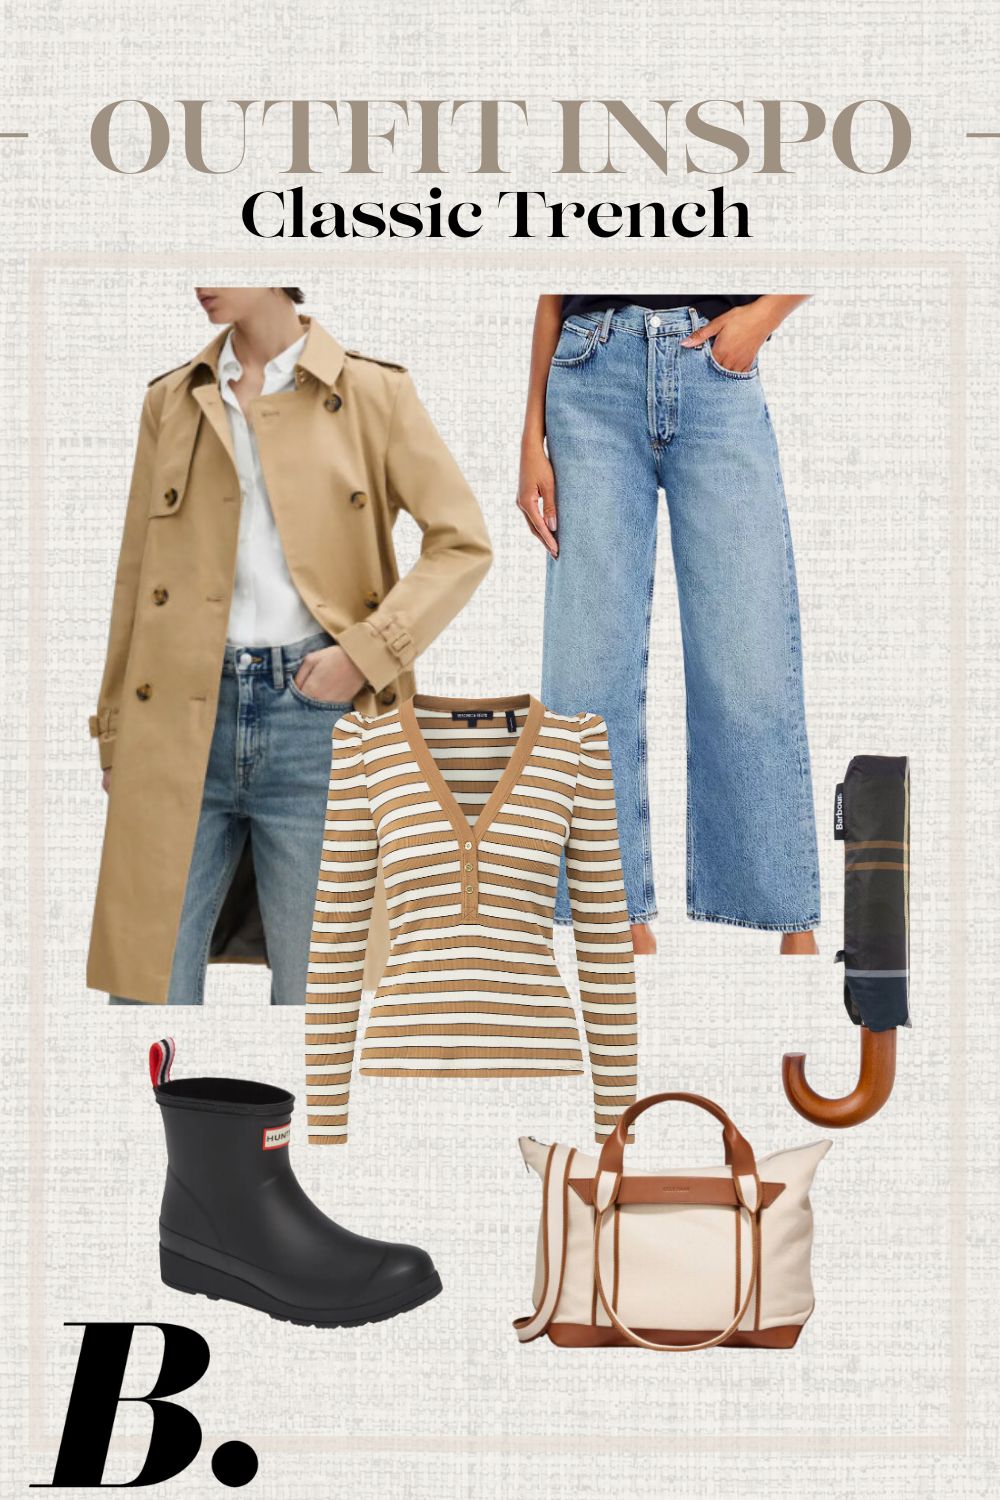 how to style a trench coat